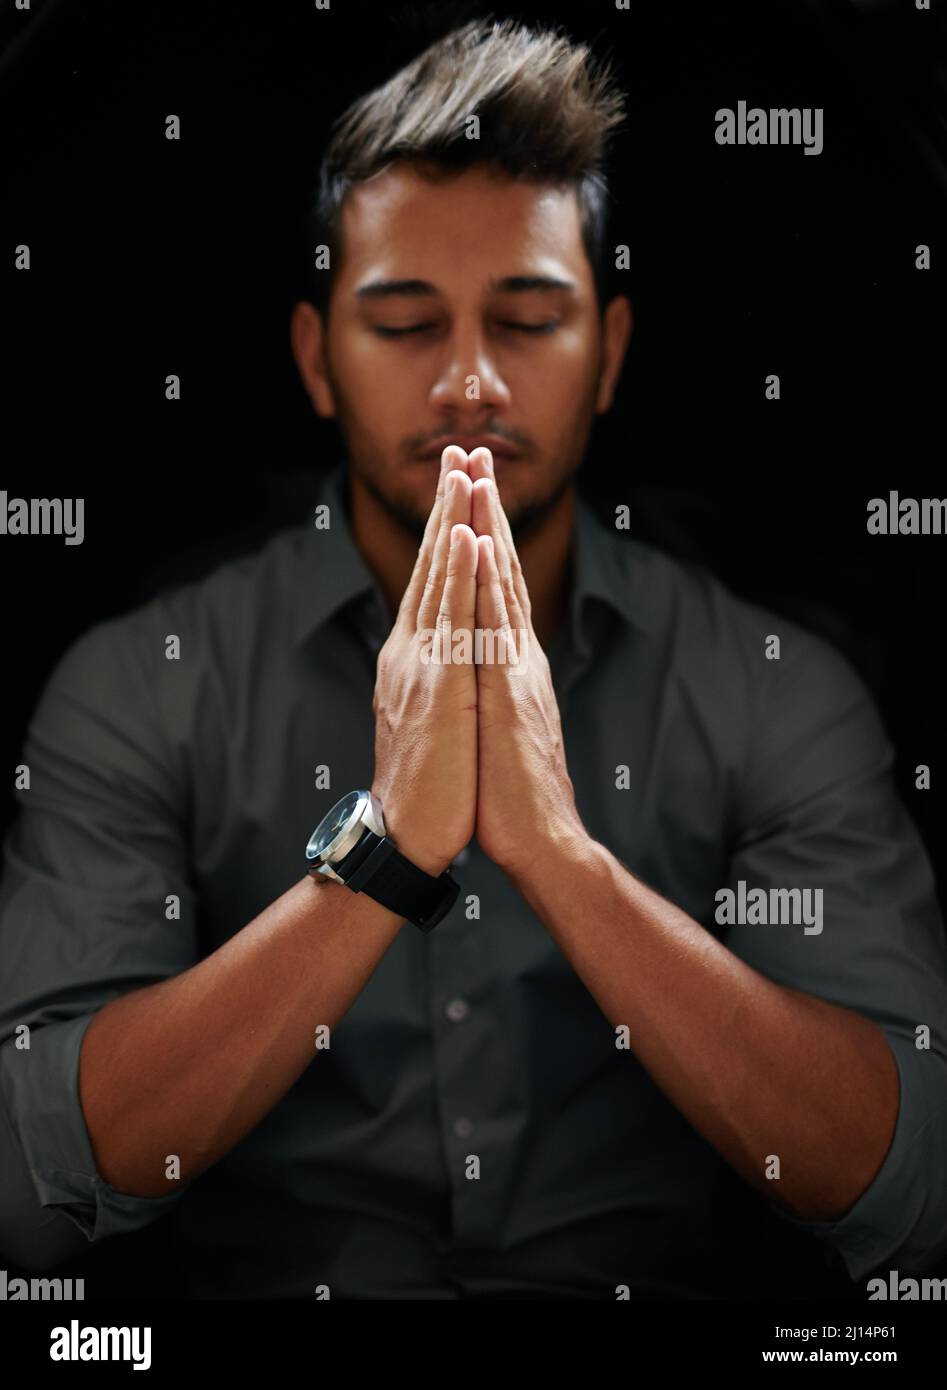 Counting his blessings. Shot of a focused young man standing with his hands together and praying with his eyes closed. Stock Photo